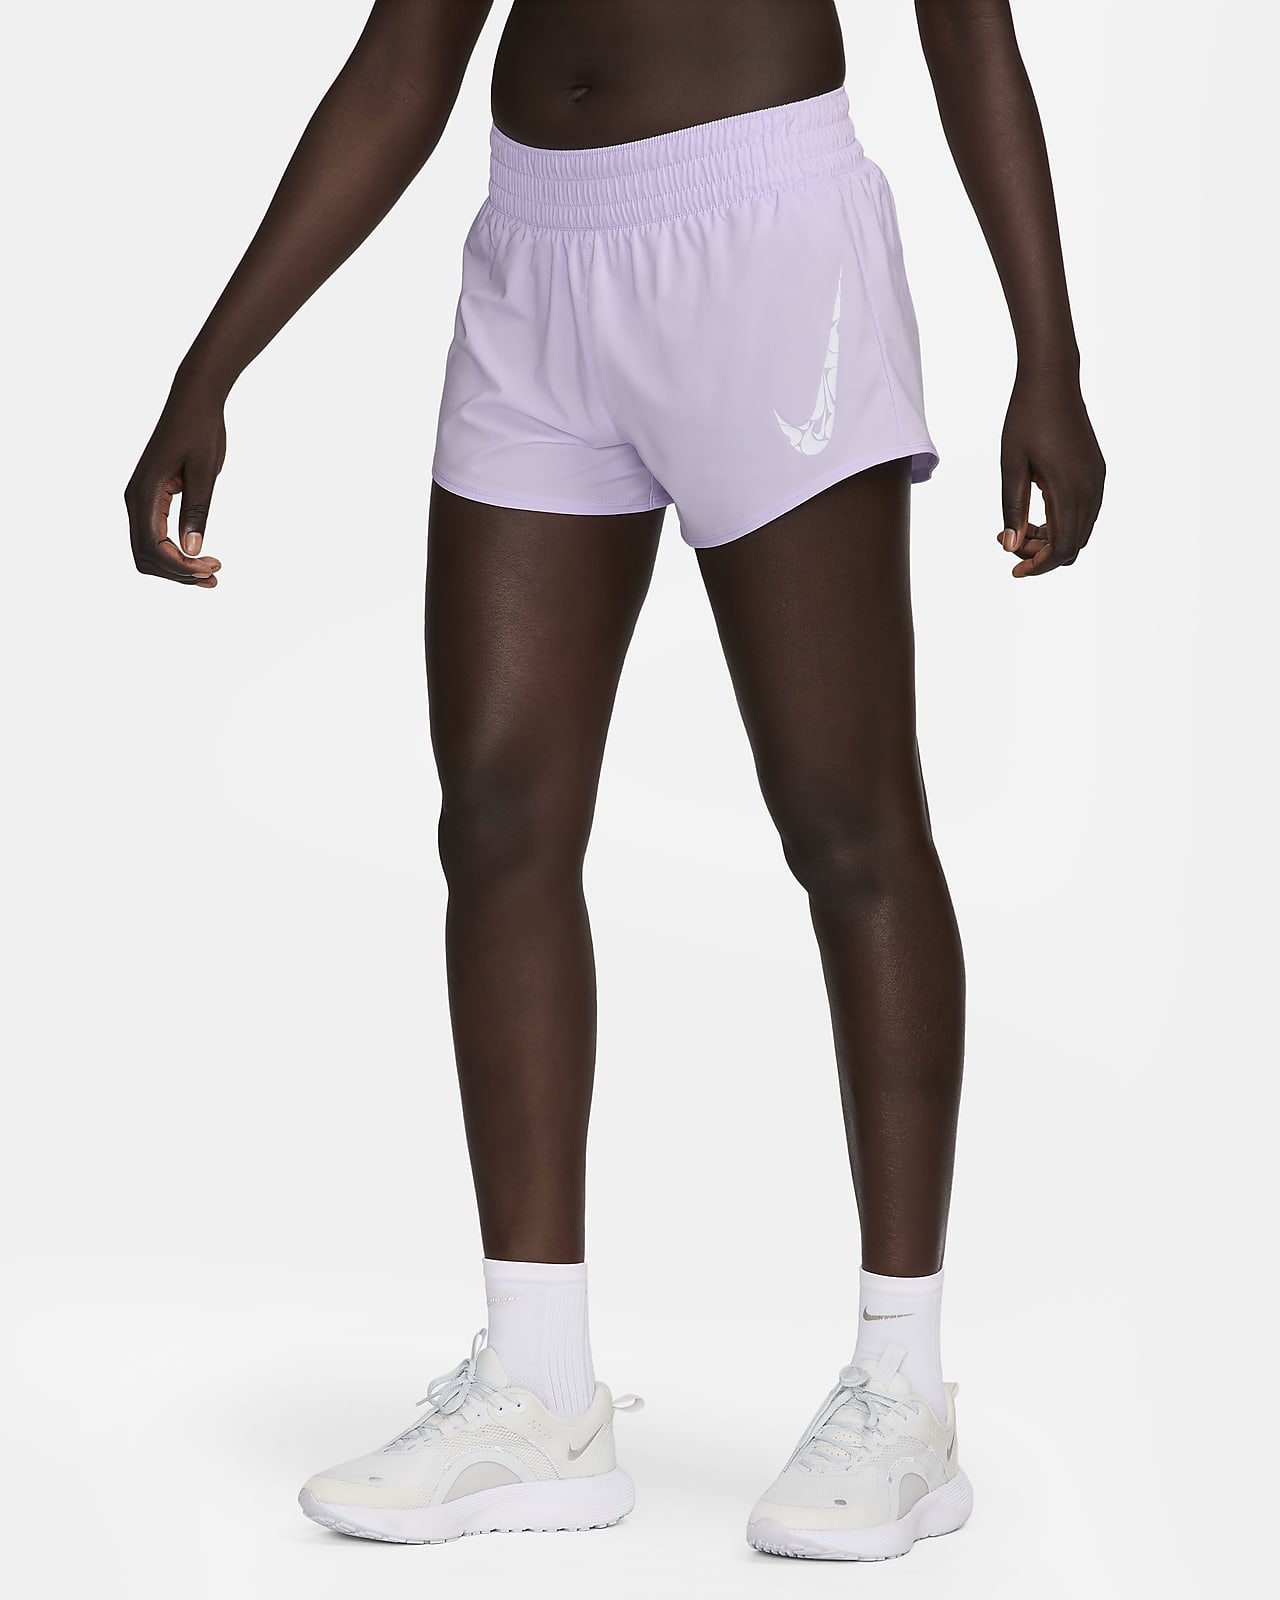 Nike Built-In Brief One-pieces for Women